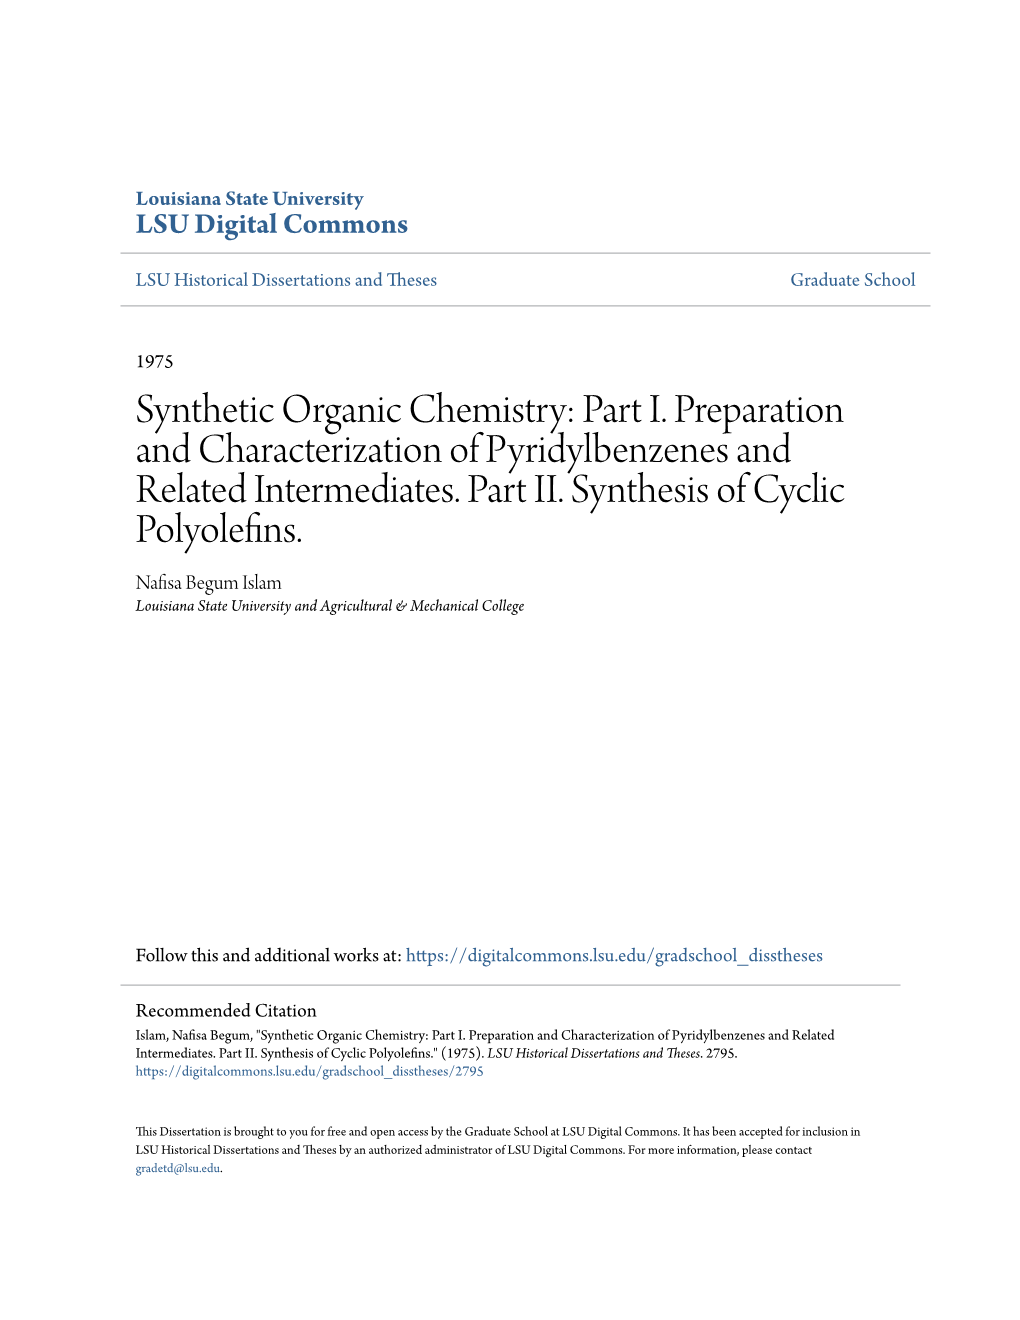 Synthetic Organic Chemistry: Part I